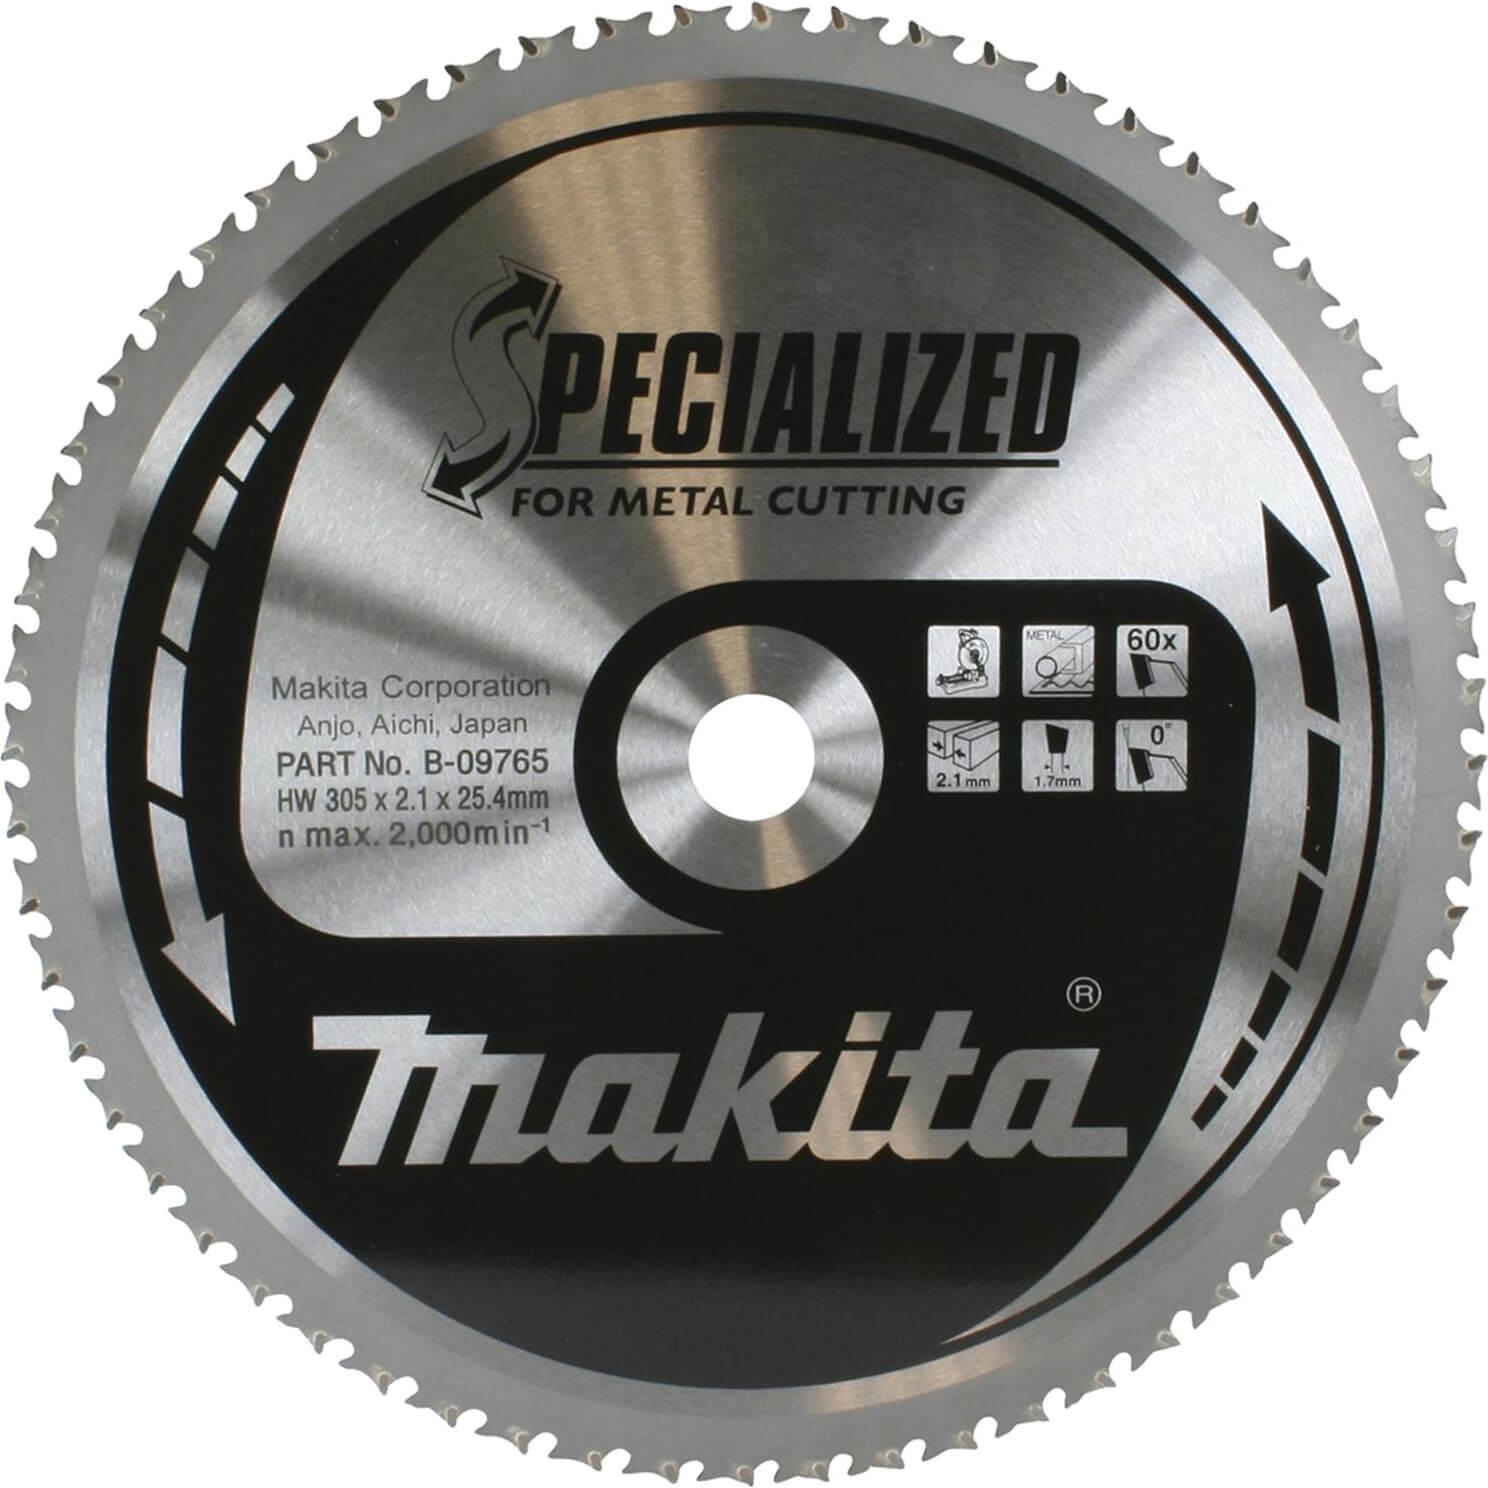 Photo of Makita Specialized Metal Cutting Saw Blade 305mm 78t 25.4mm